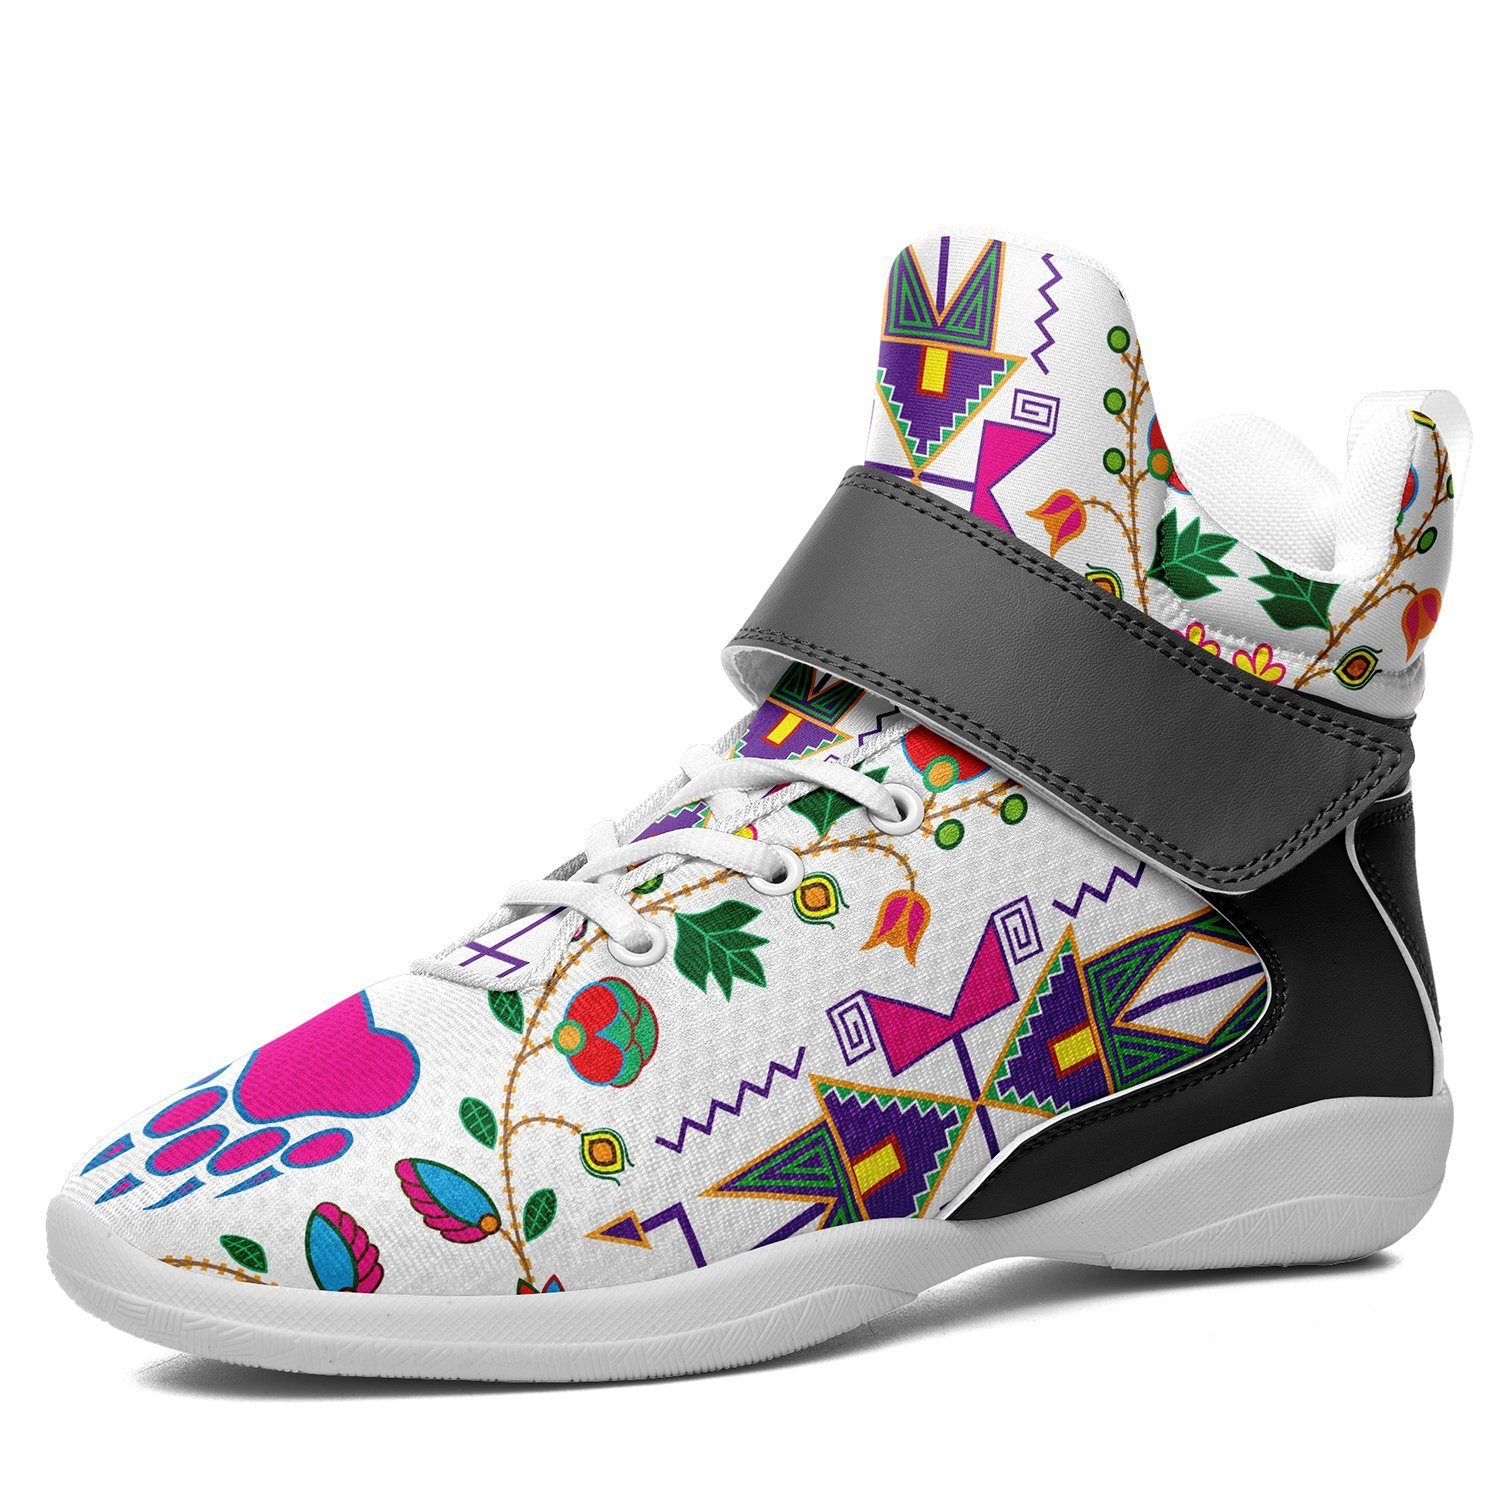 Geometric Floral Fall White Kid's Ipottaa Basketball / Sport High Top Shoes 49 Dzine US Women 4.5 / US Youth 3.5 / EUR 35 White Sole with Gray Strap 